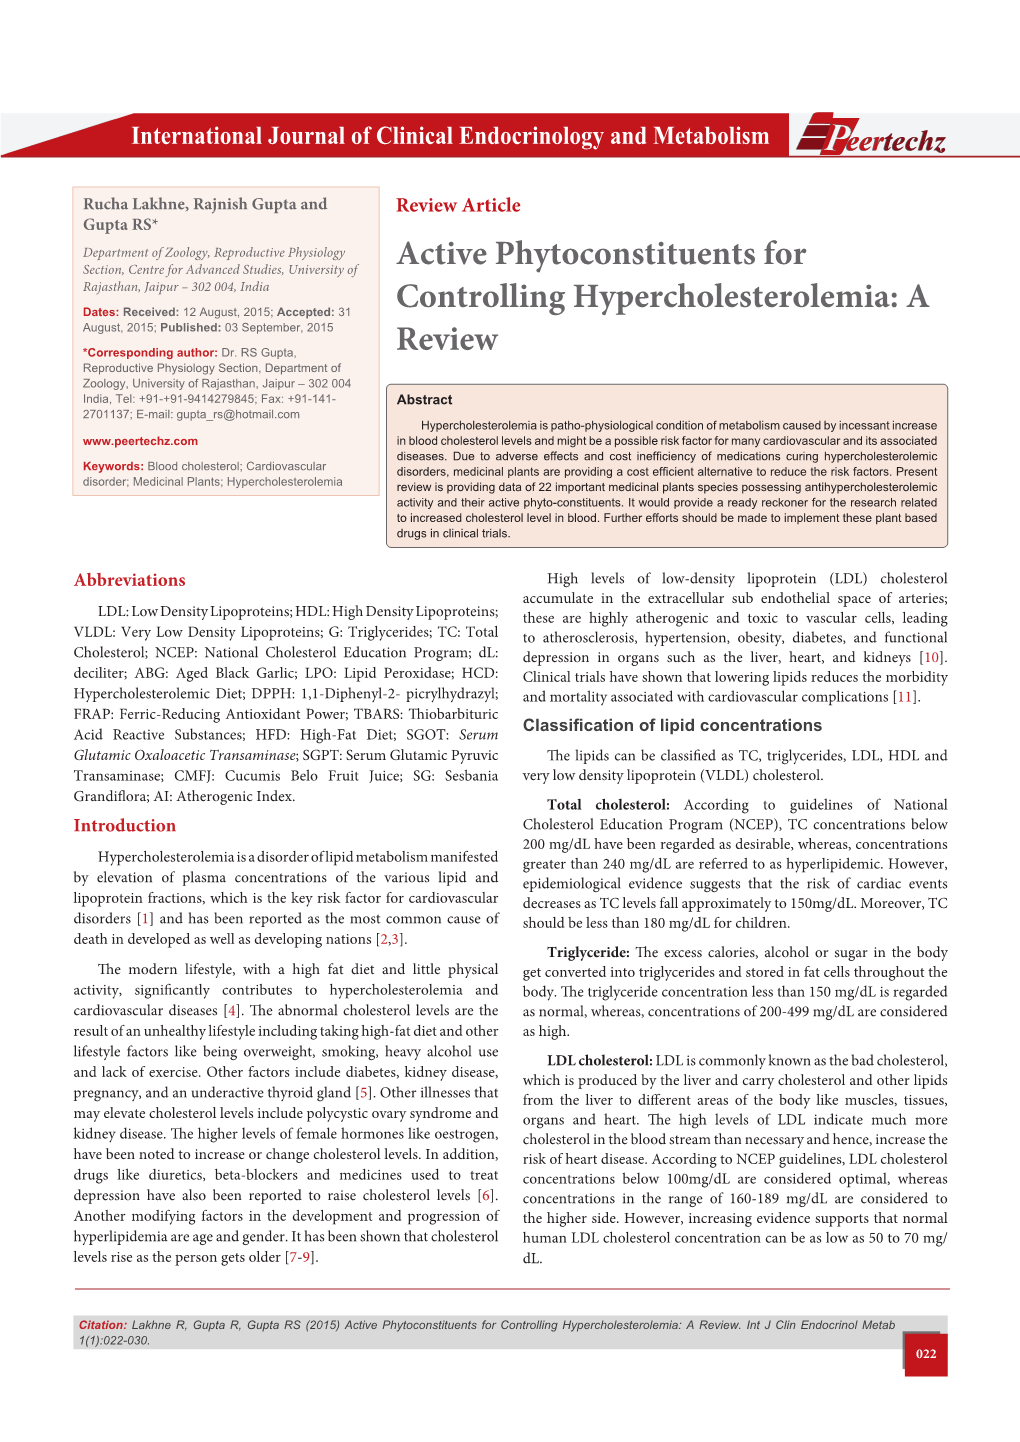 Active Phytoconstituents for Controlling Hypercholesterolemia: a Review